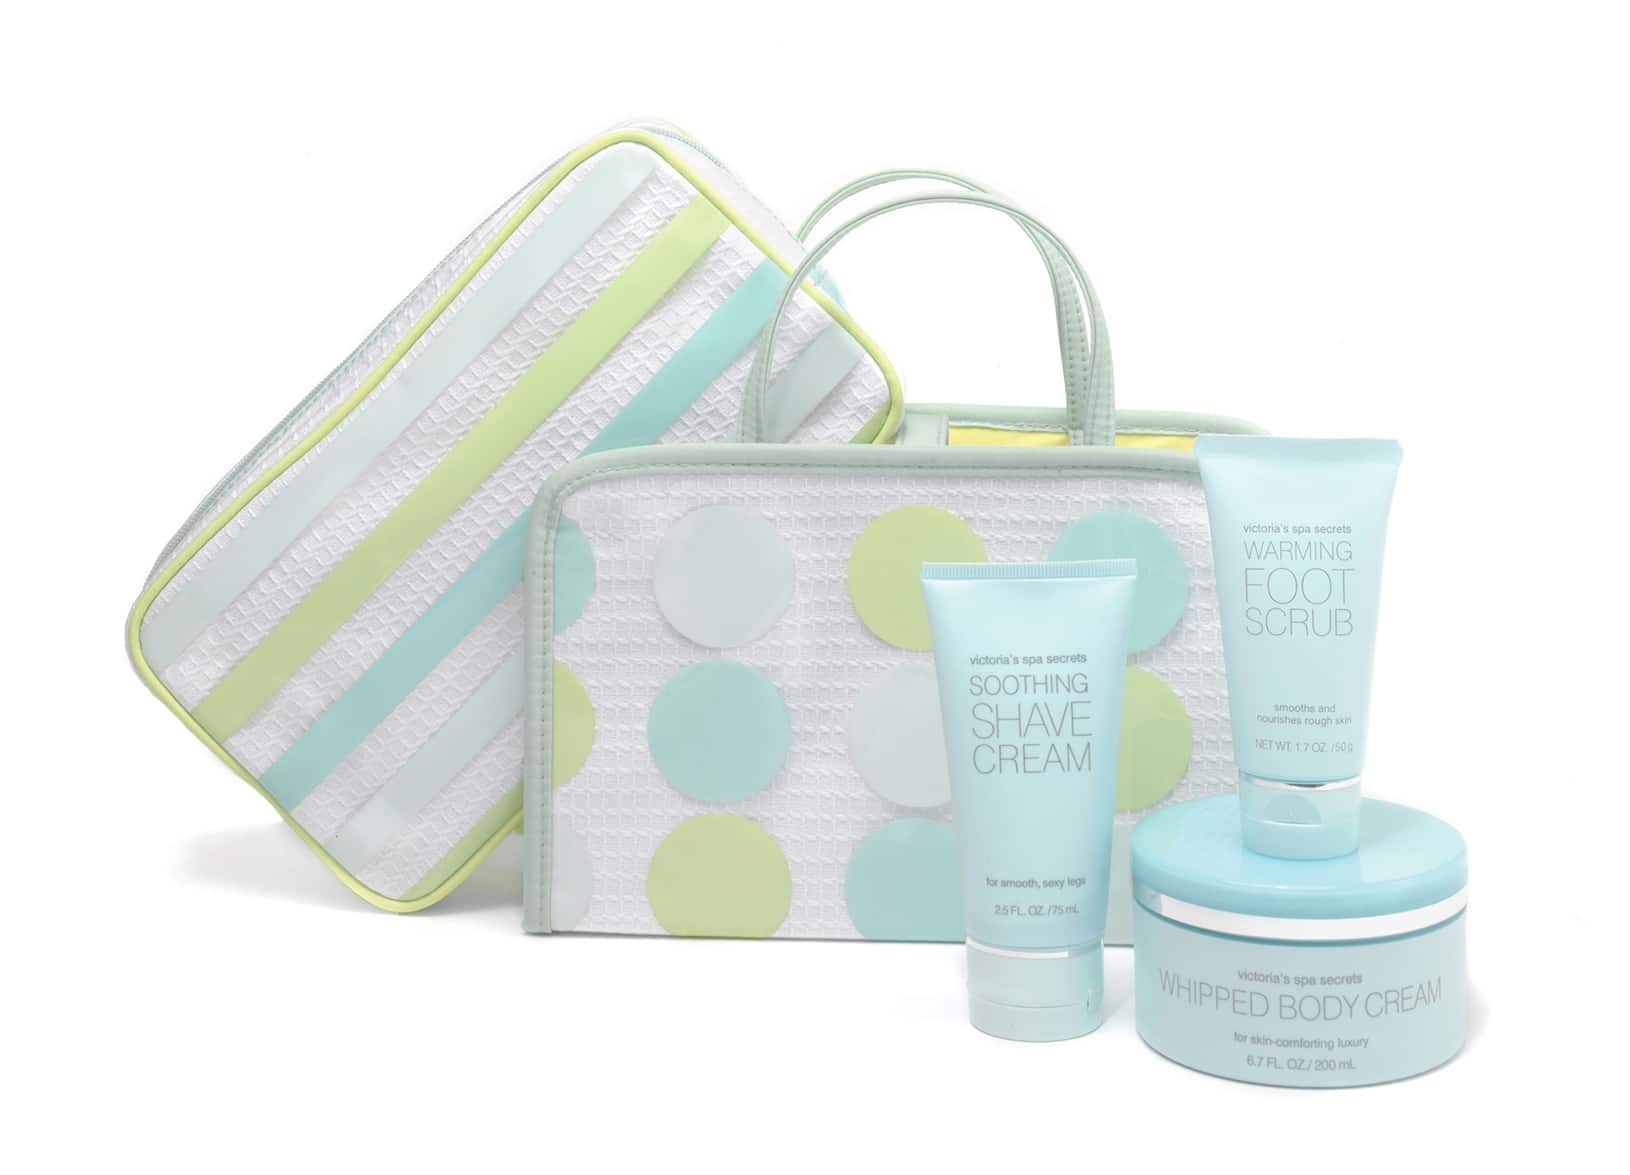 Travel gift bag design for Victoria's Secret Spa Secrets travel gift bag design with lotions and pouches with bold polka dots and stripes.